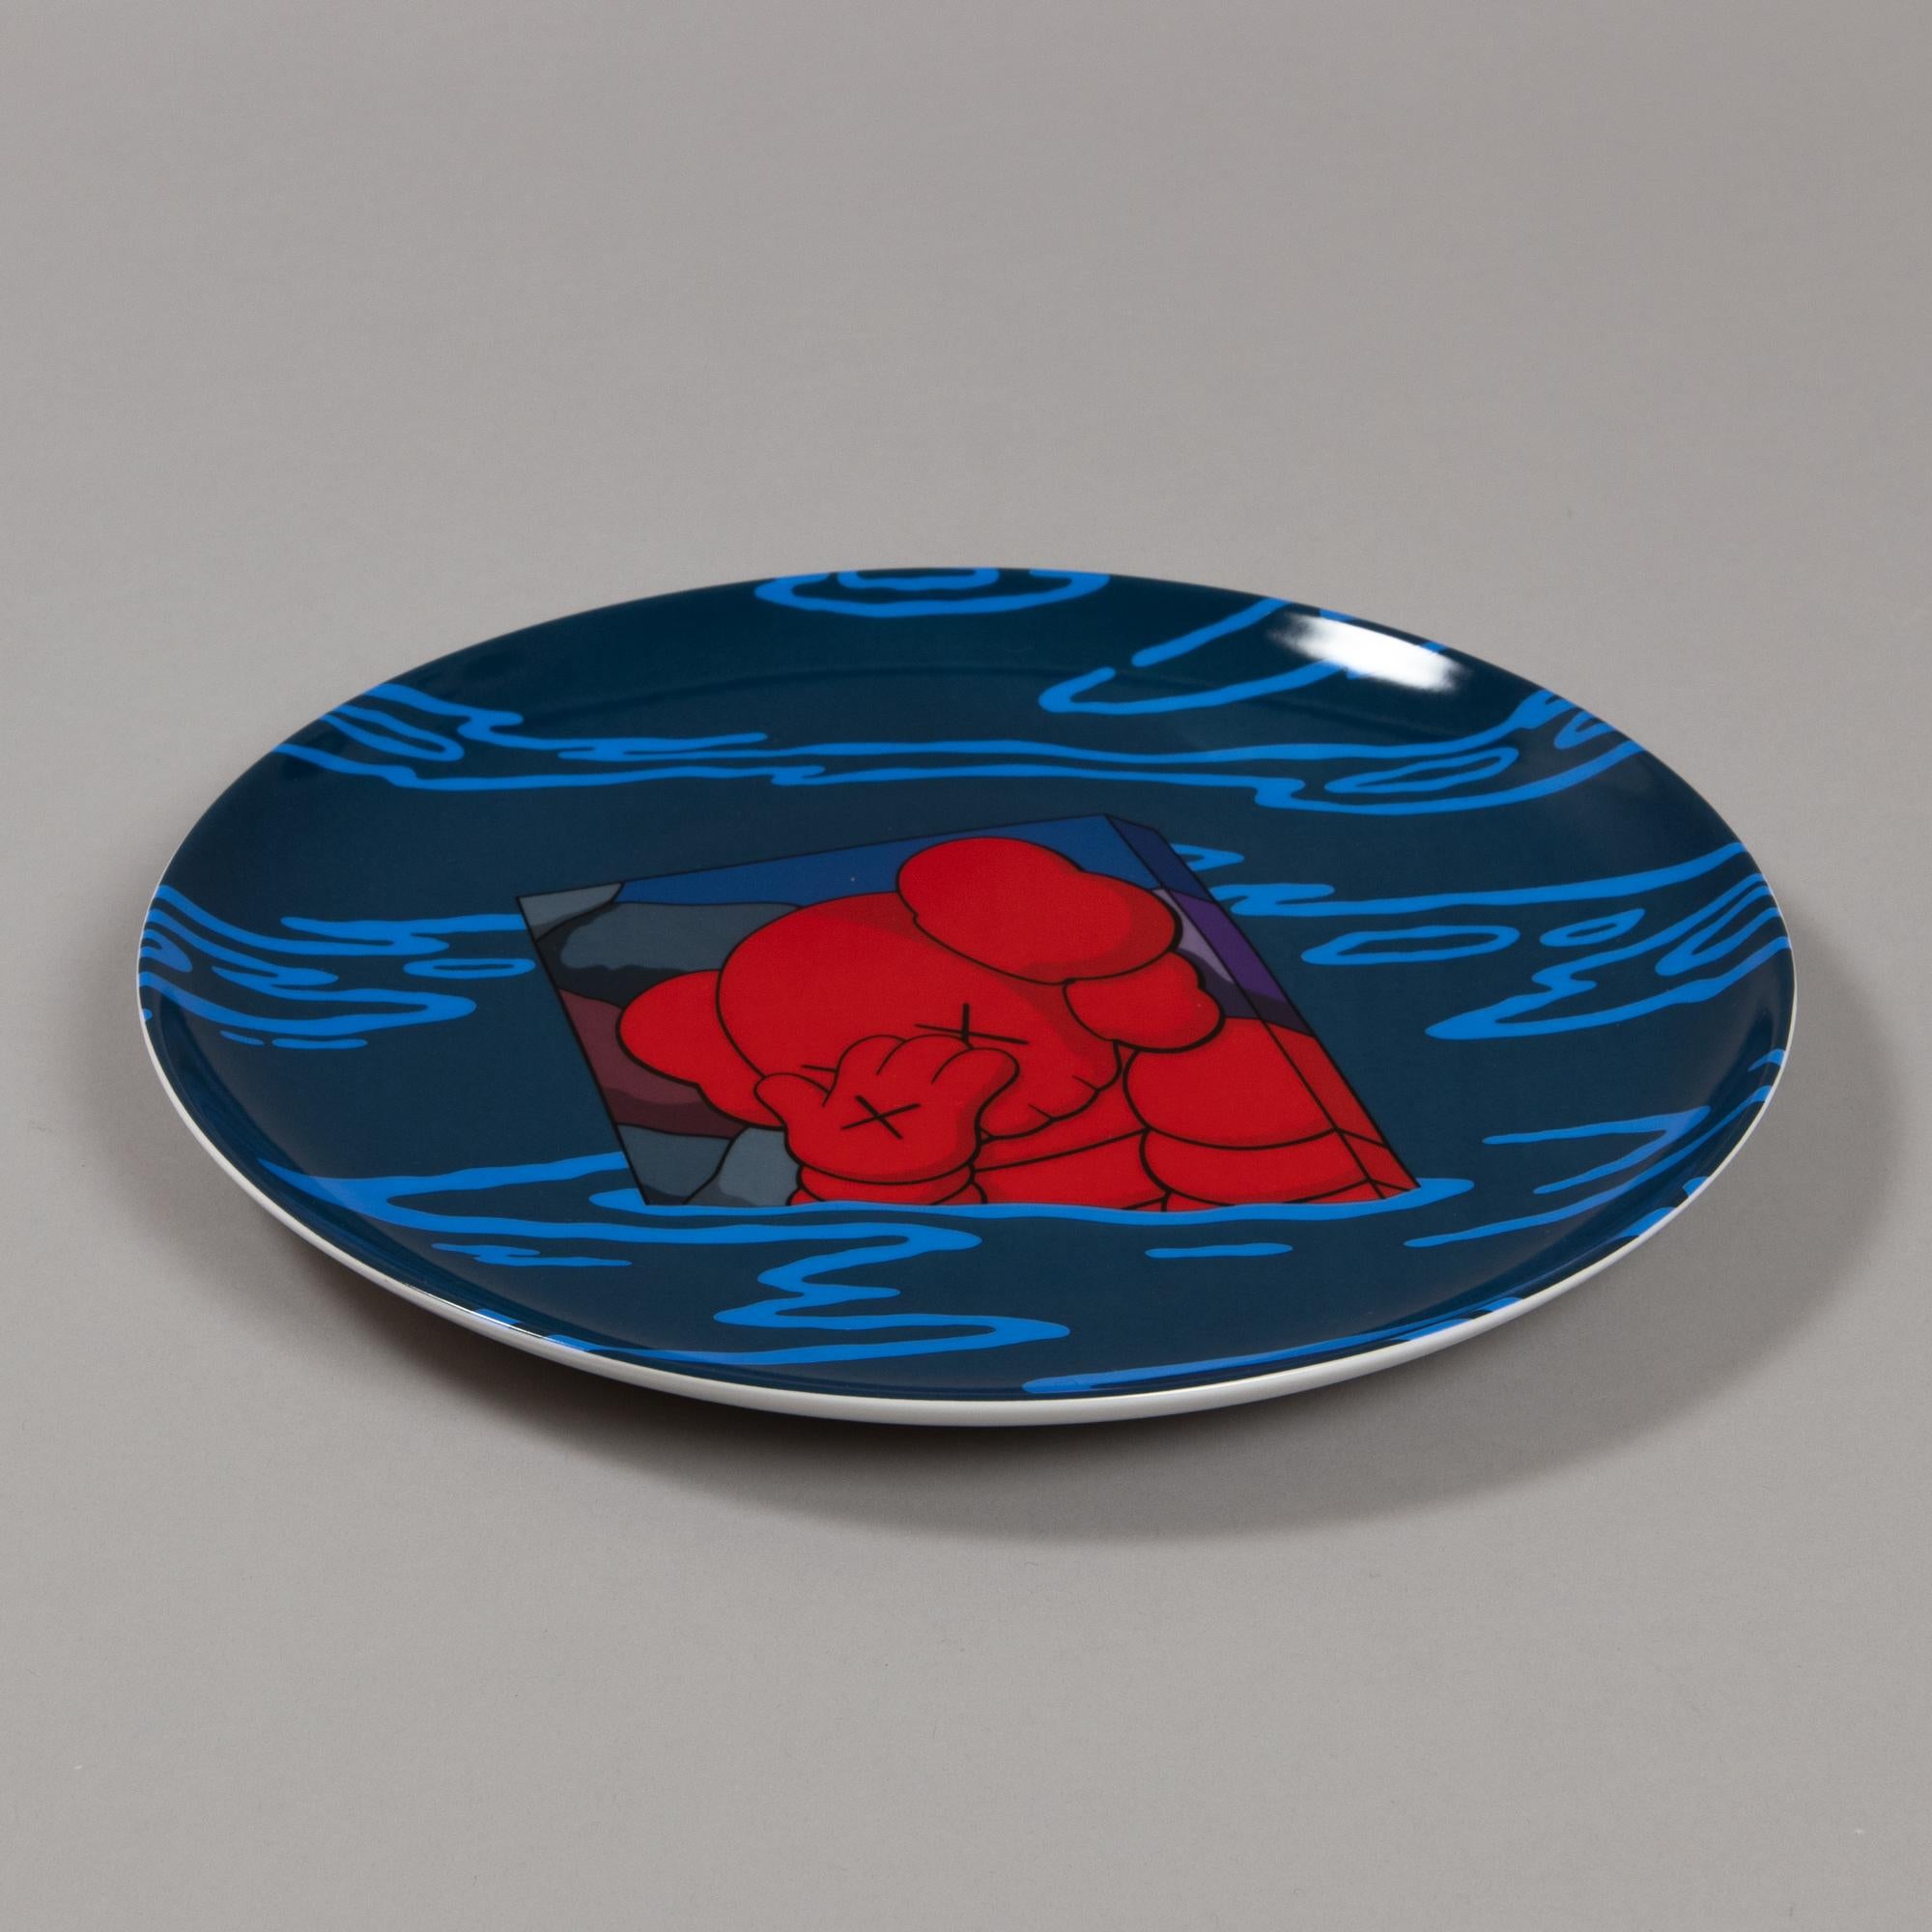 KAWS, Hours, Nights, Weeks, Months - Limited Edition Plate, Street Art 1